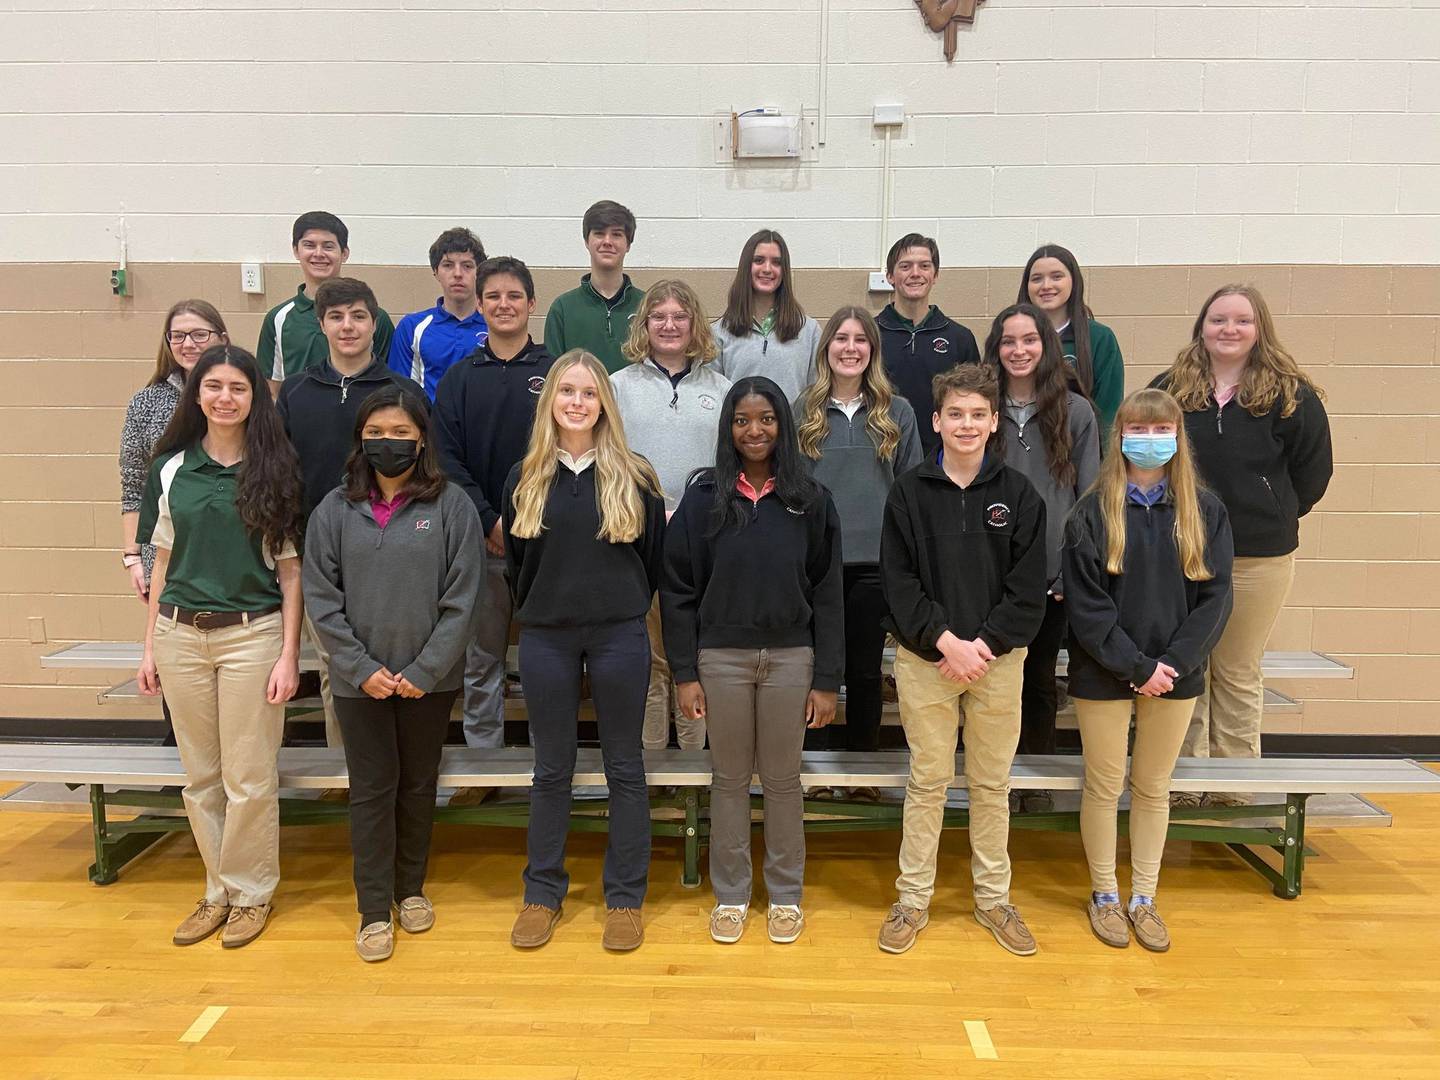 Providence Catholic High School in New Lenox inducted 64 students and six student directors into the school’s Augustinian Youth Ministry organization on Tuesday, April 5, 2022, at the school. Pictured are the freshman and sophomore members.